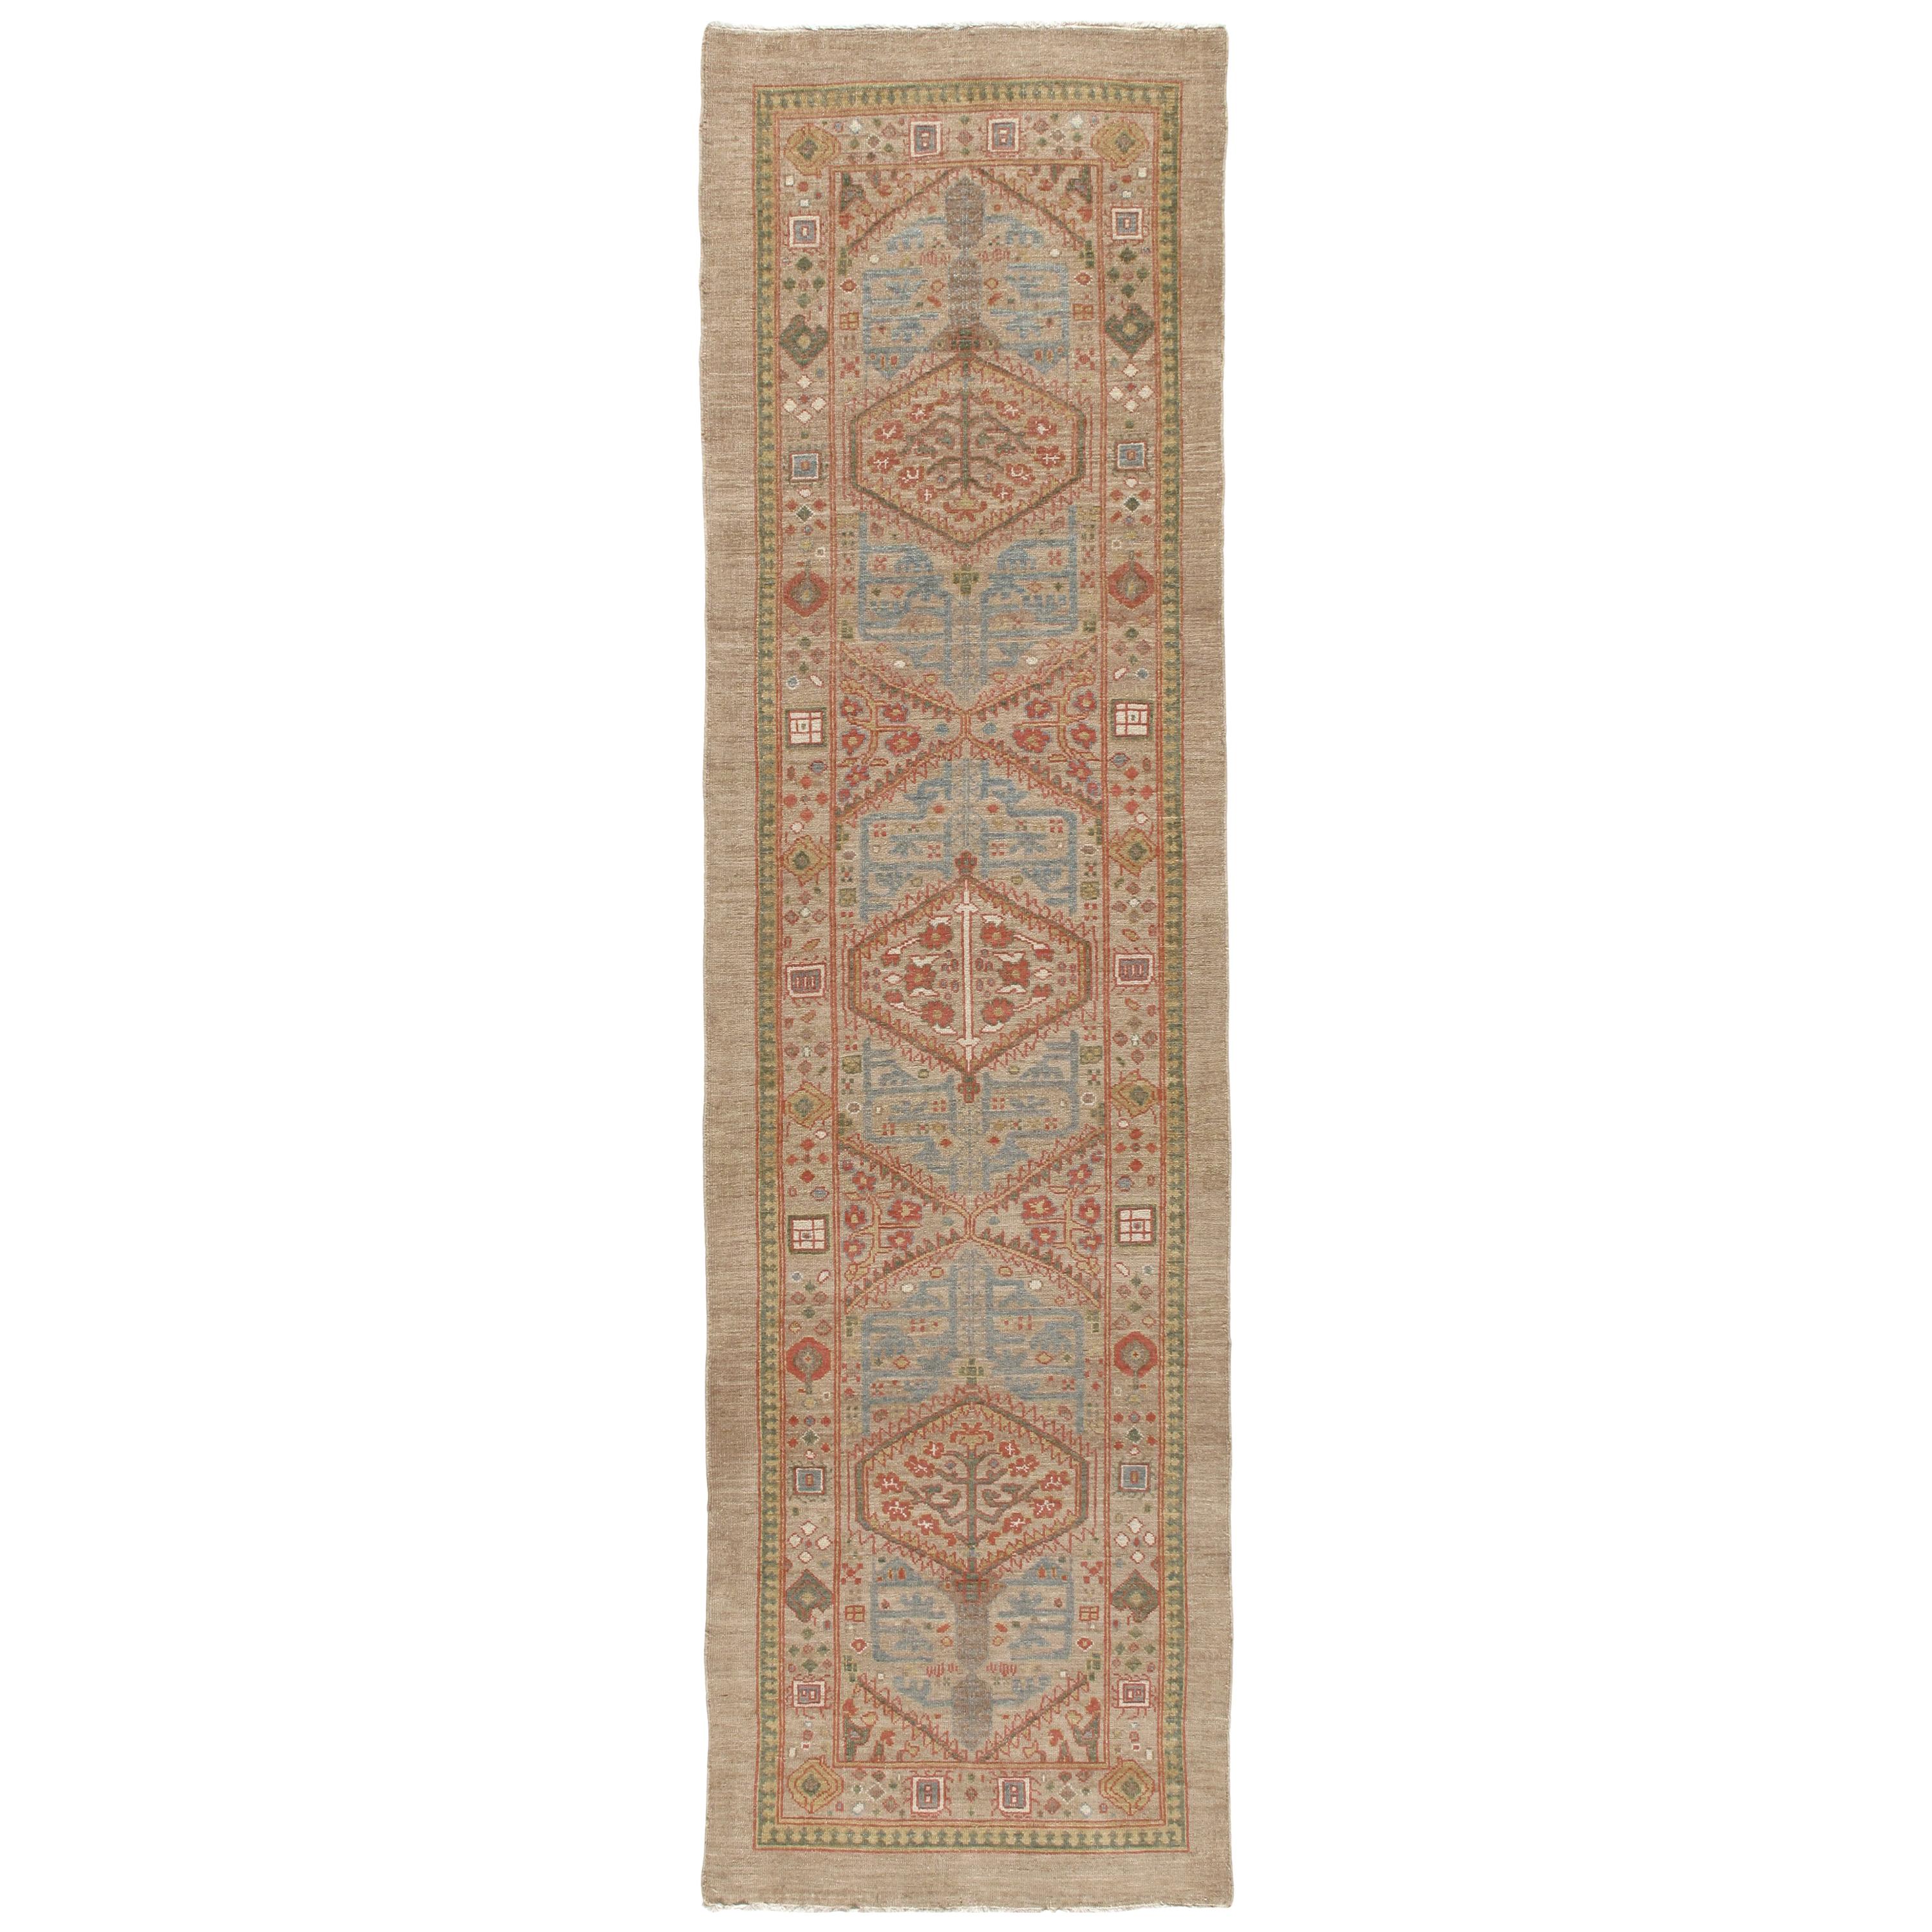 Persian Serab Hand Knotted Runner Rug in Camel, Pale Blue, and Red Colors